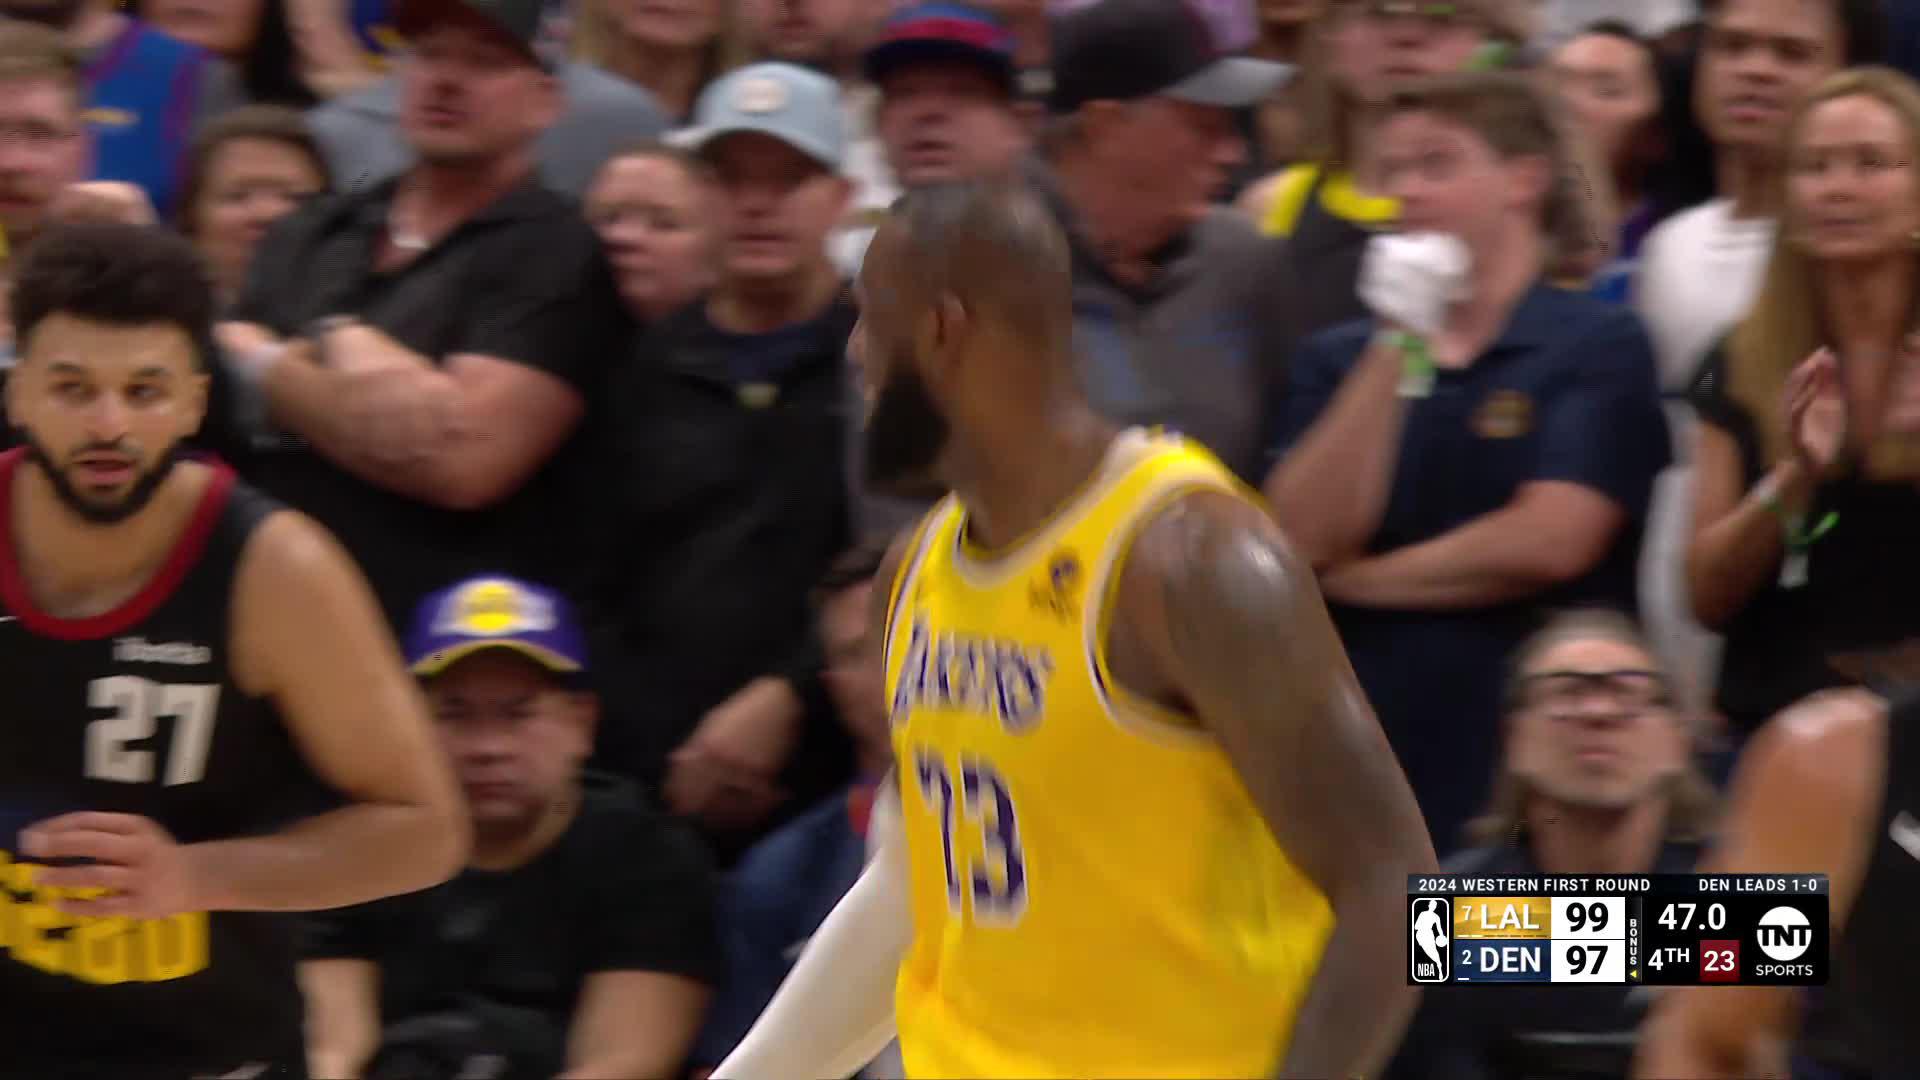 LeBron James Goes for 26